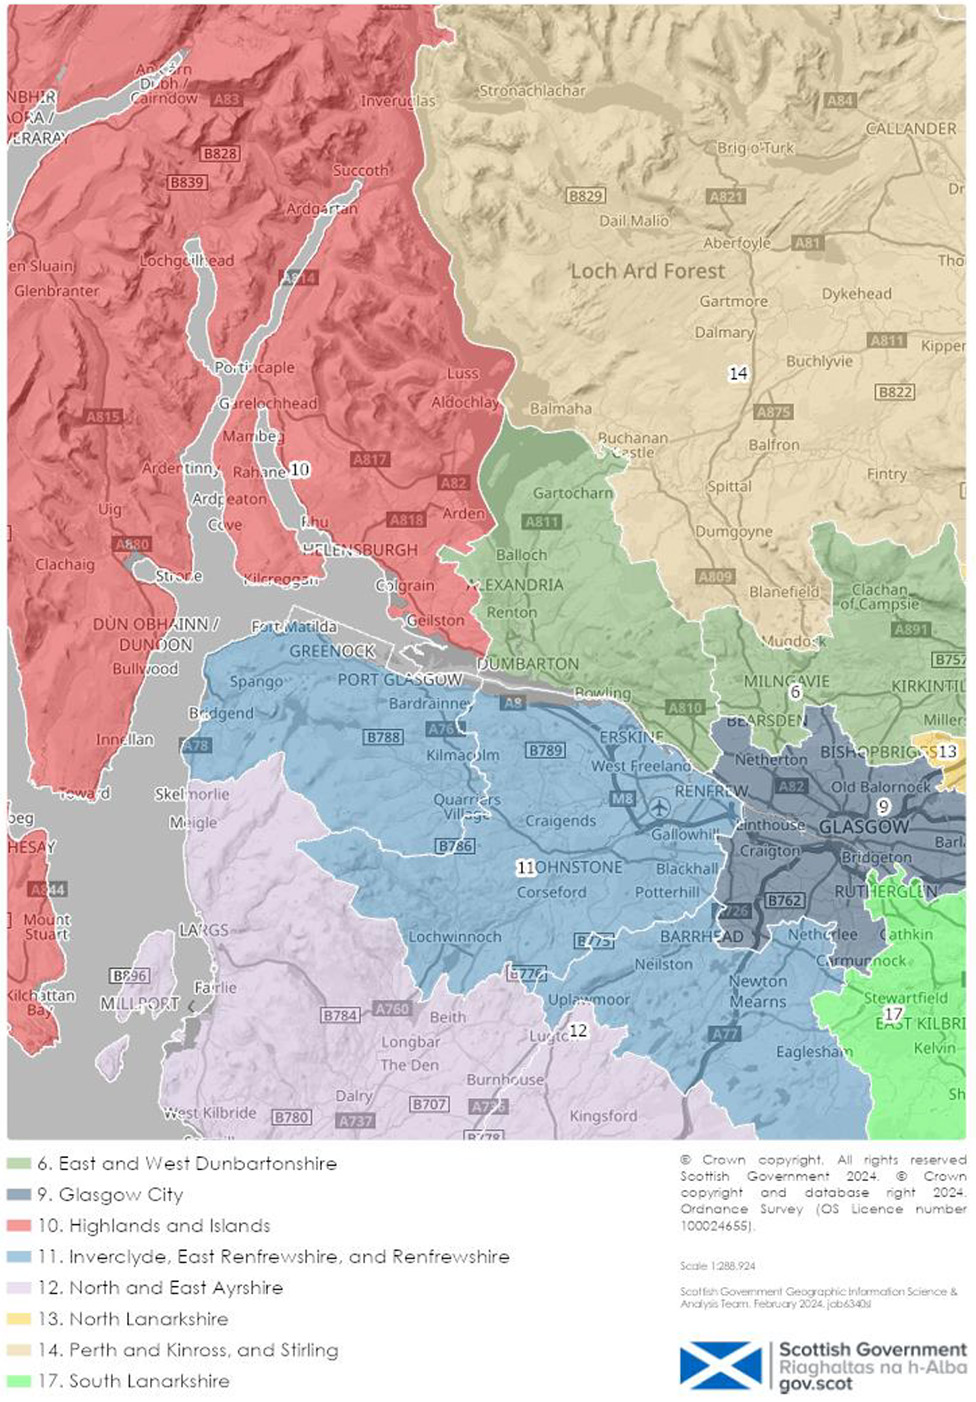 A map focusing on Helensburgh and Lomond showing that that this area will be included in the proposed ‘Highlands and Islands’ region.